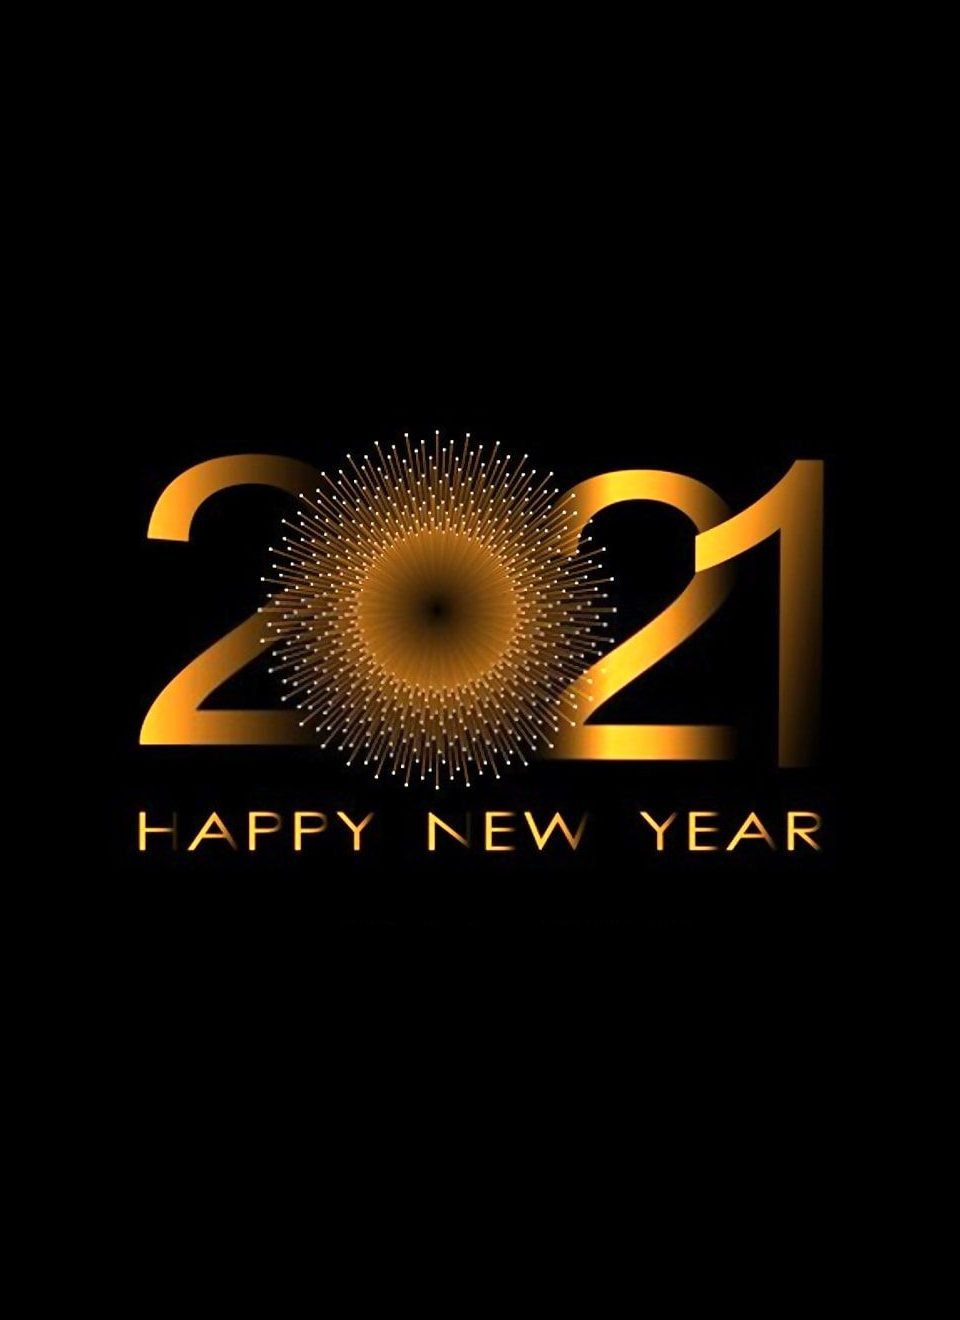 Stylized Happy New Year 2021 image with greetings from the Clark Davis Associates staffing team!